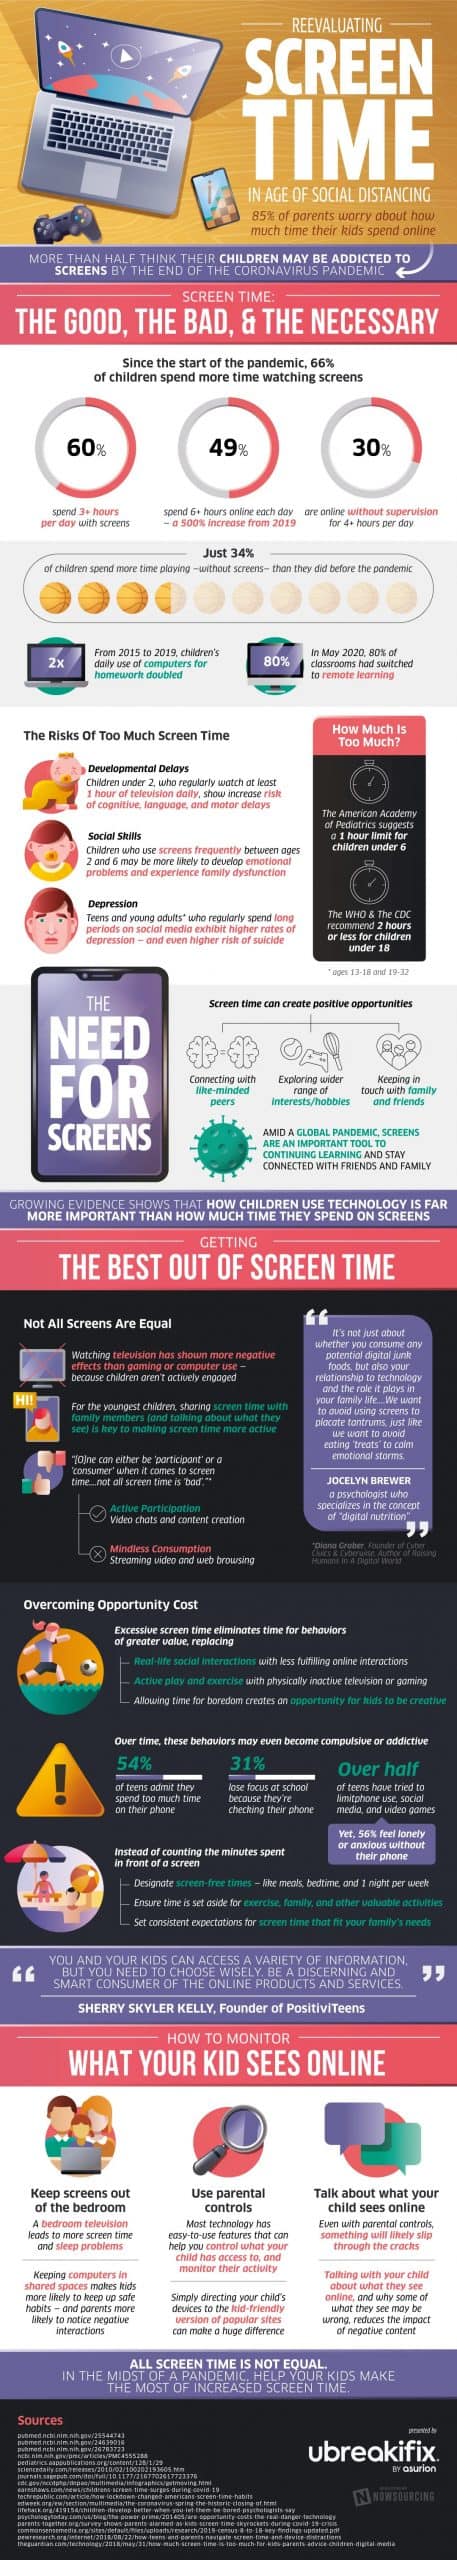 Reevaluating Screen Time